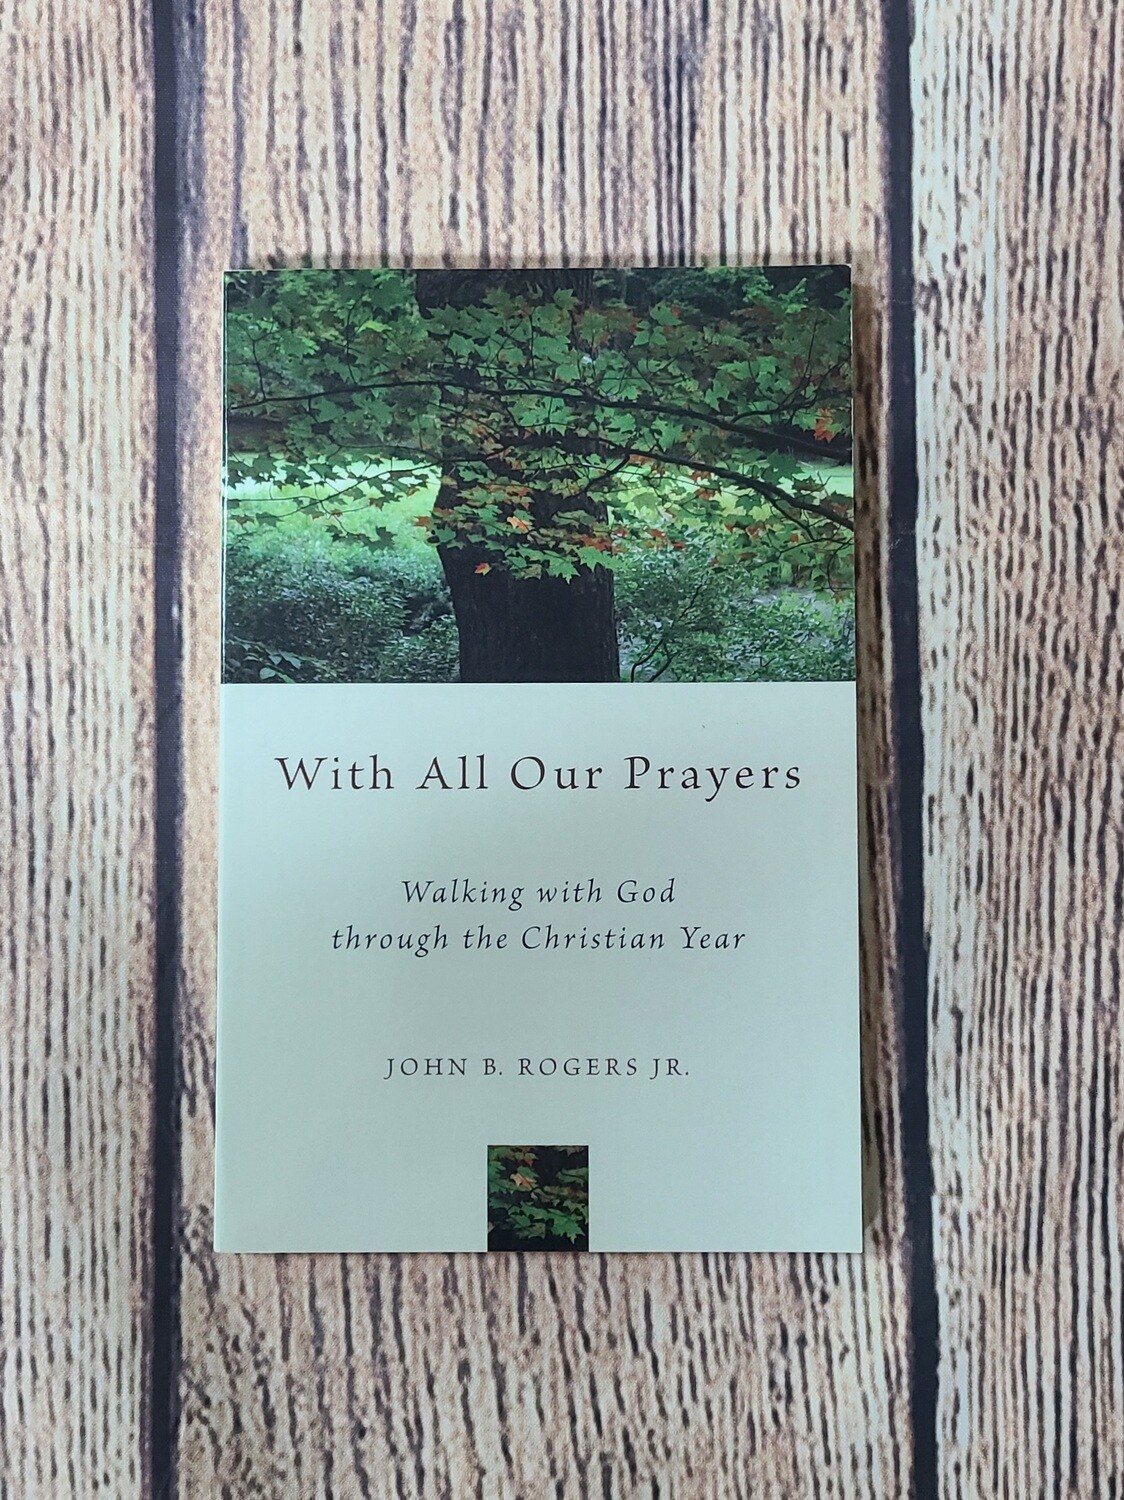 With all Our Prayers: Walking with God through the Christian Year by John B. Rogers Jr. - Great Condition